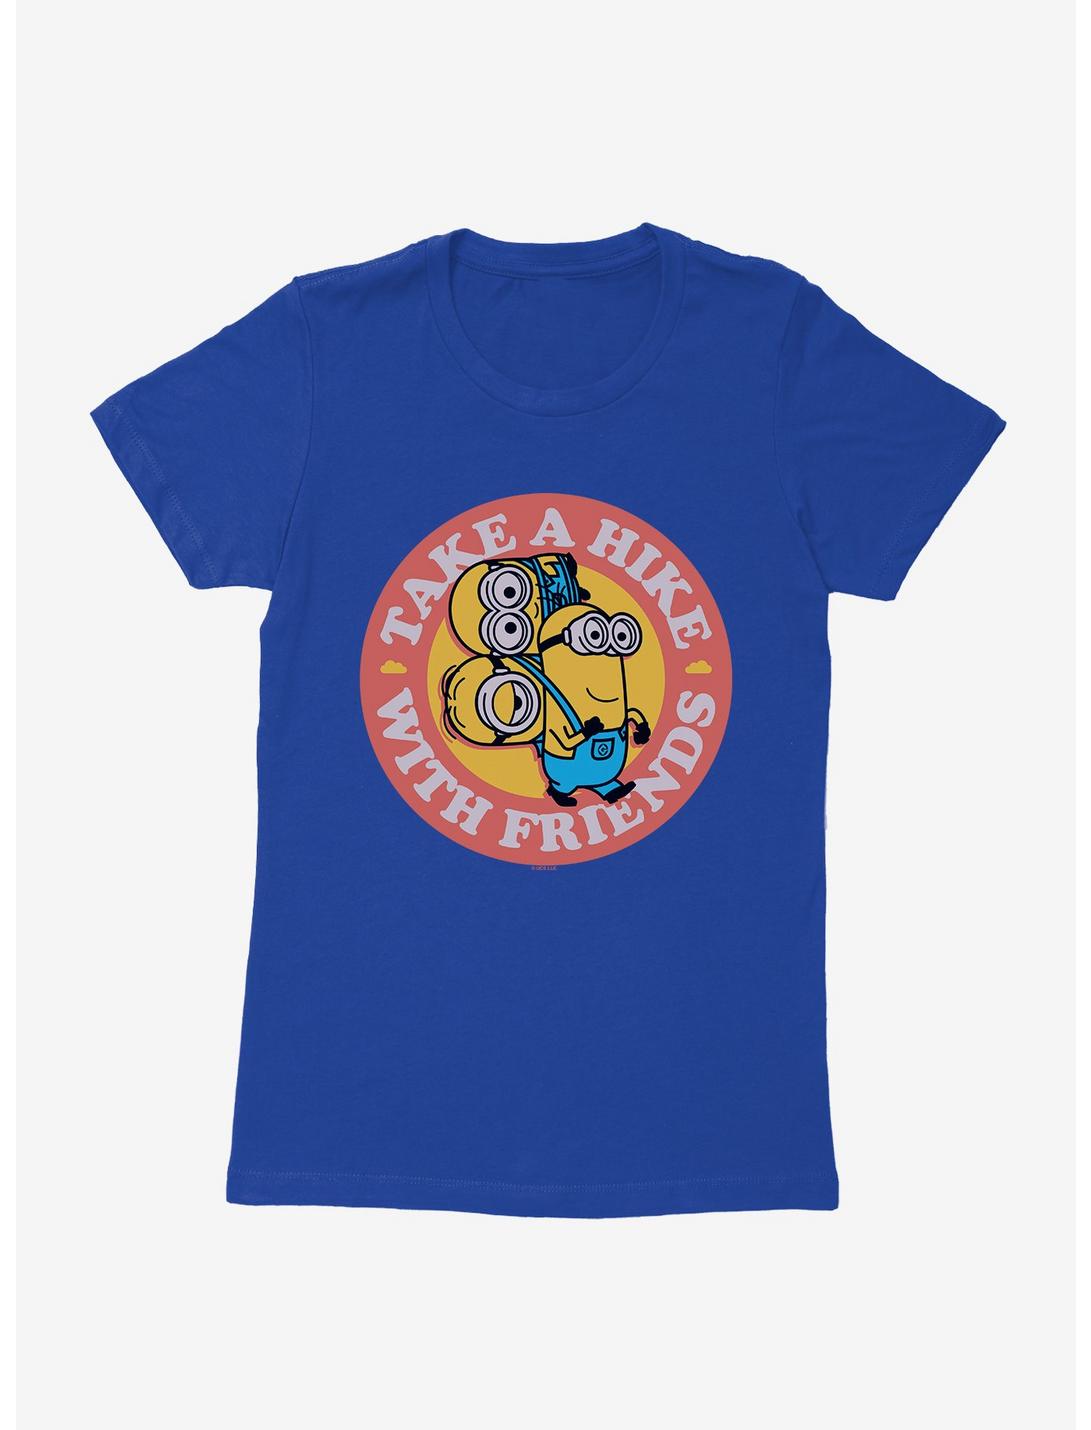 Minions Hike With Friends Womens T-Shirt, ROYAL, hi-res